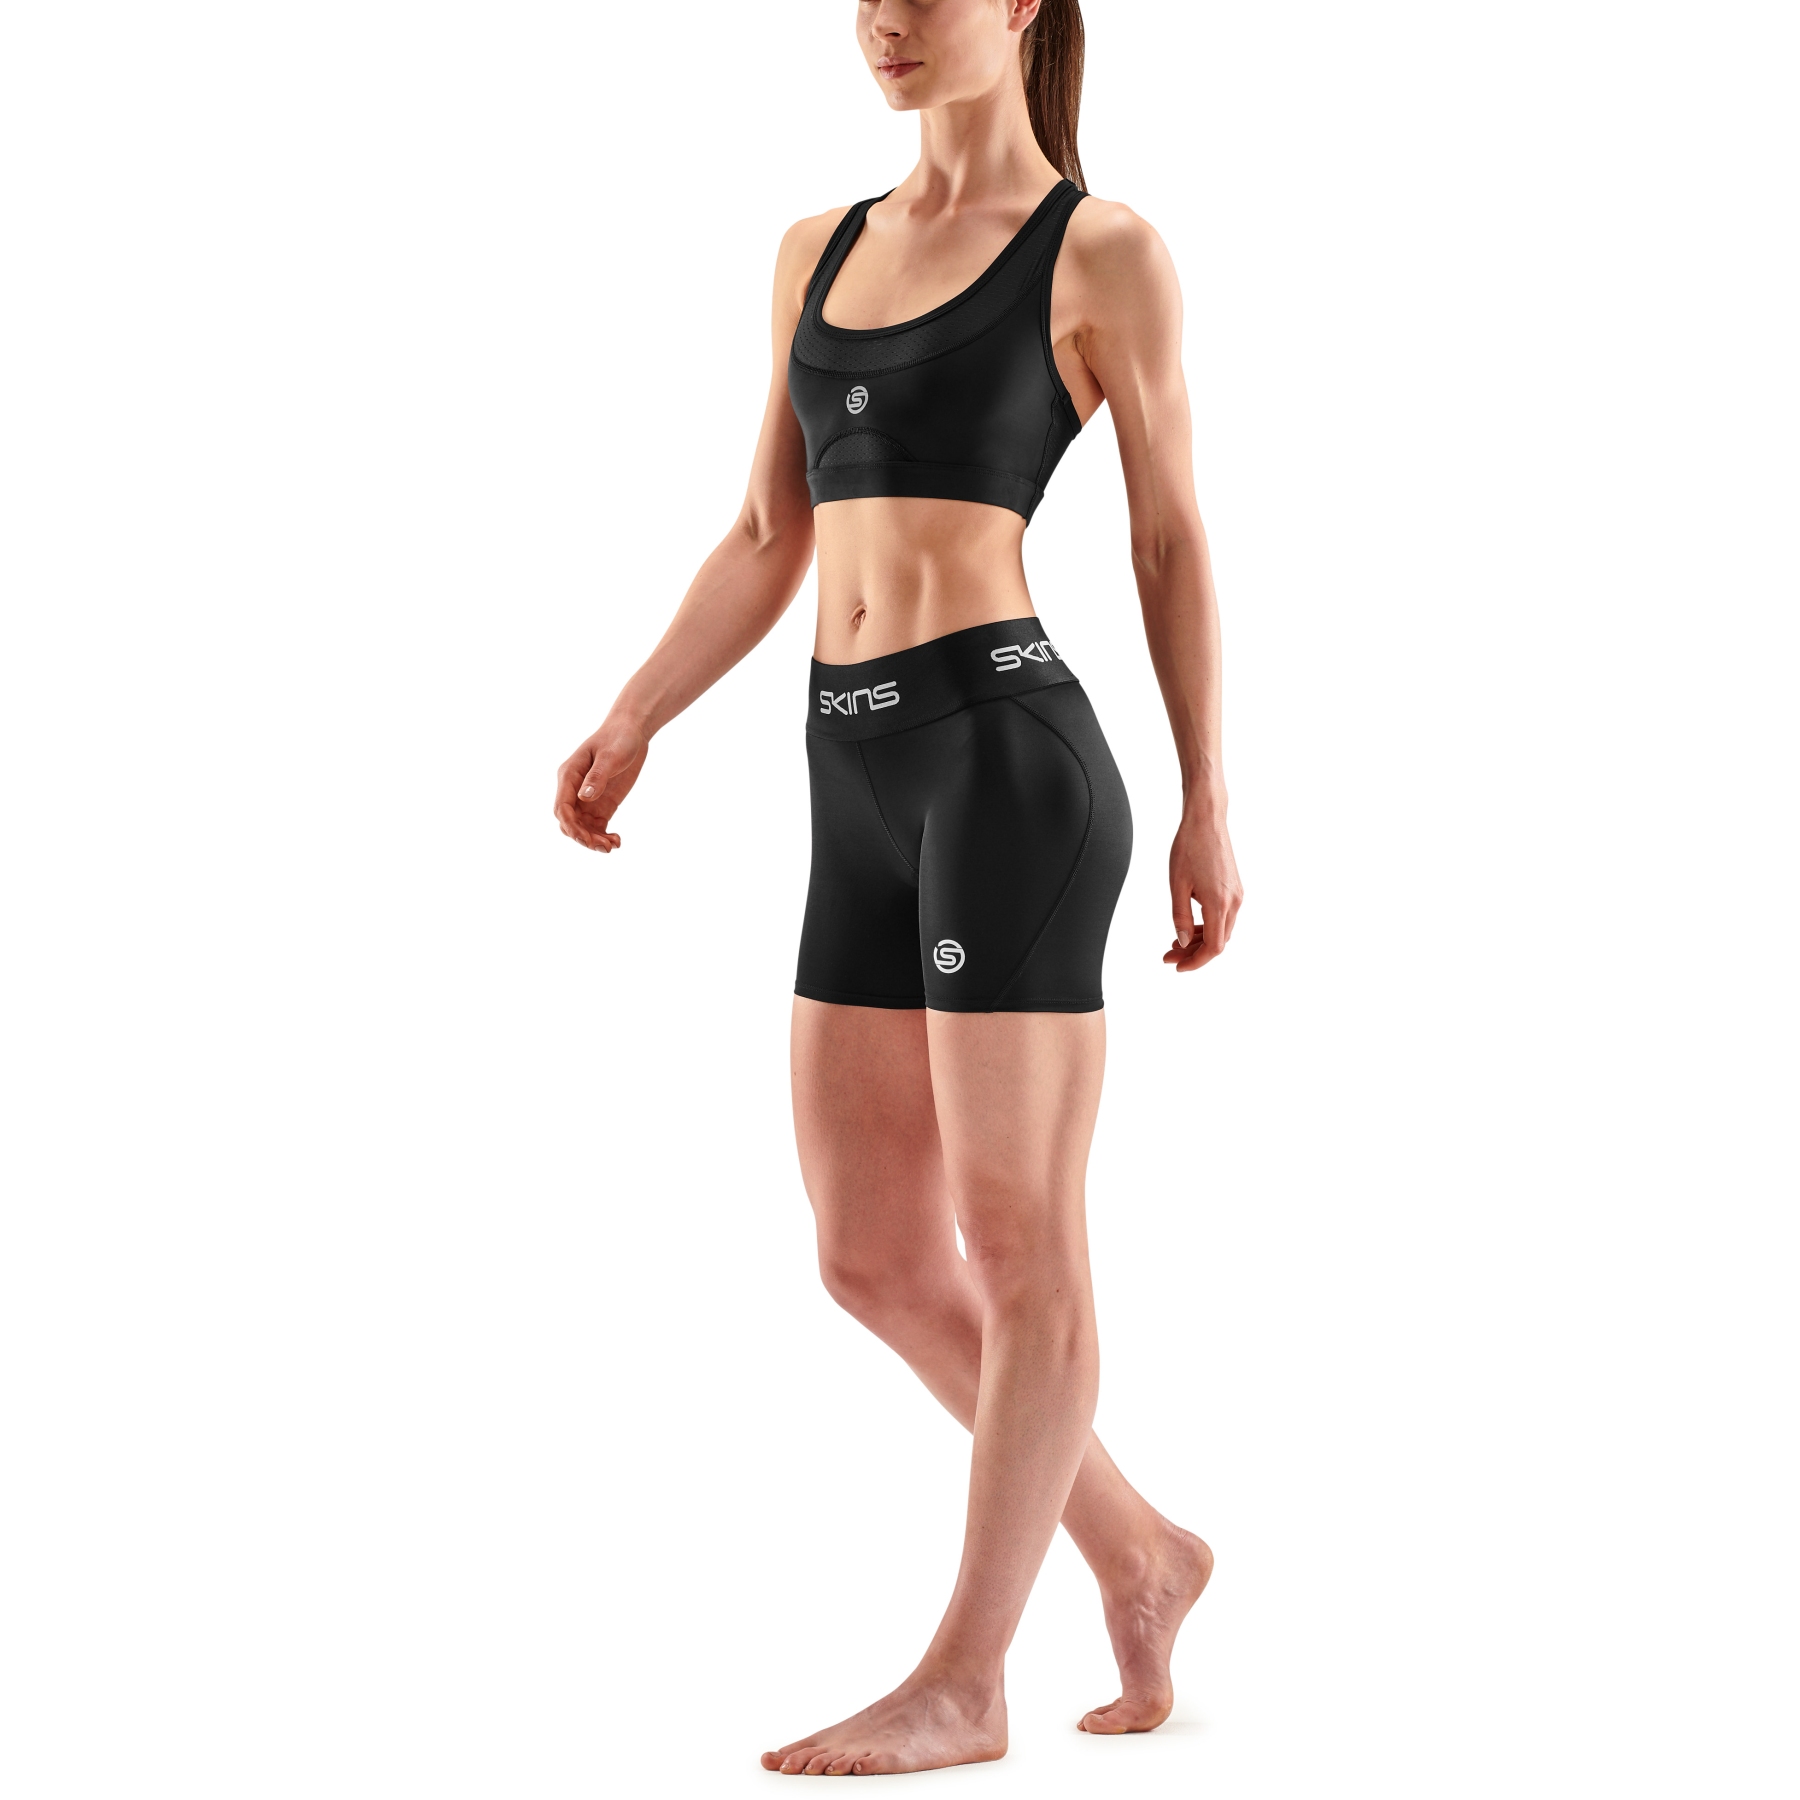 Run-Hike-Play: SKINS DNAmic Women's Superpose Compression Shorts Review &  Giveaway